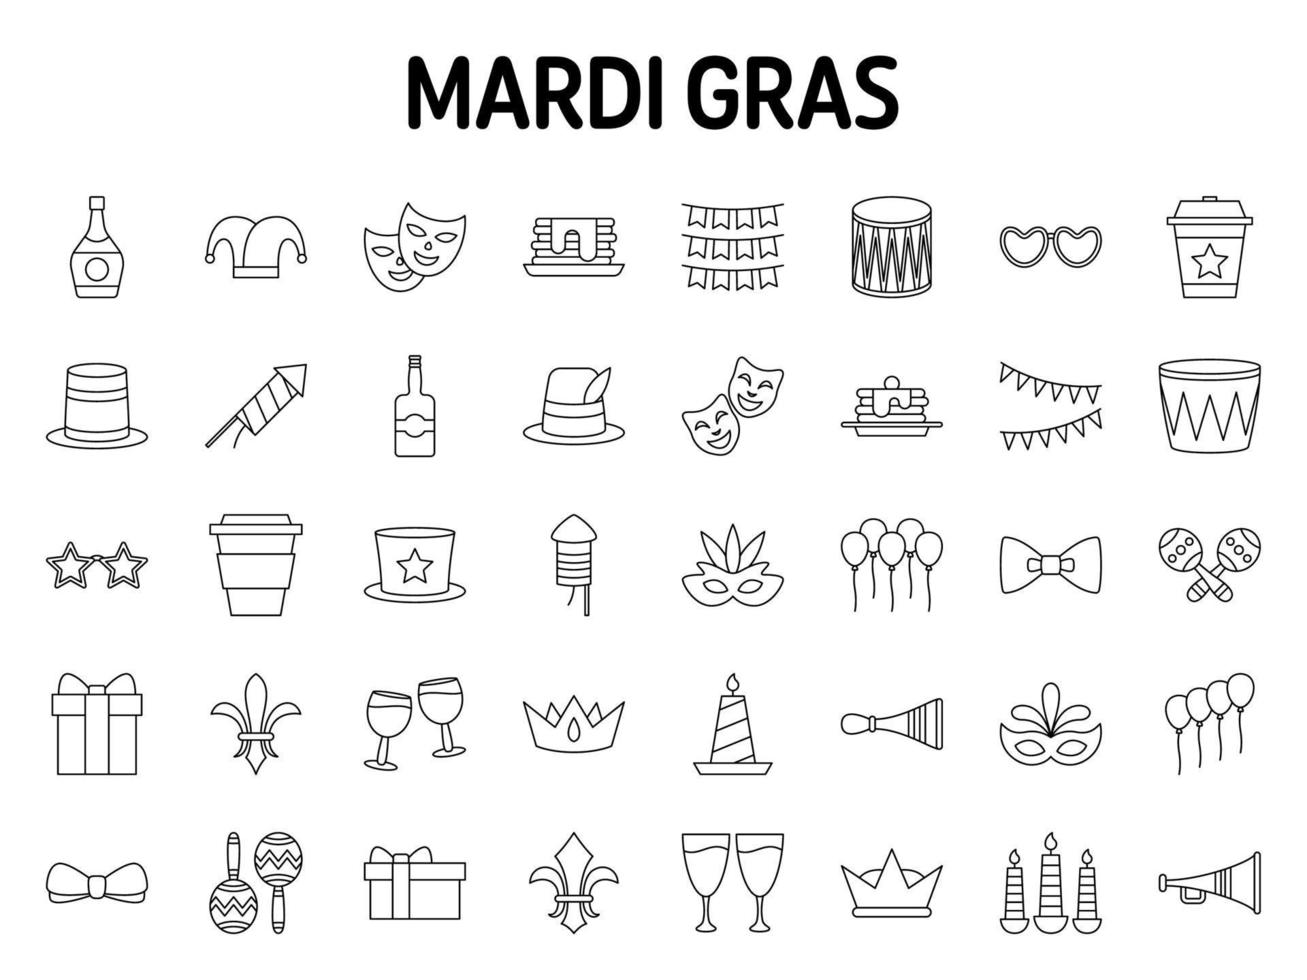 Collection of design elements for Mardi gras vector